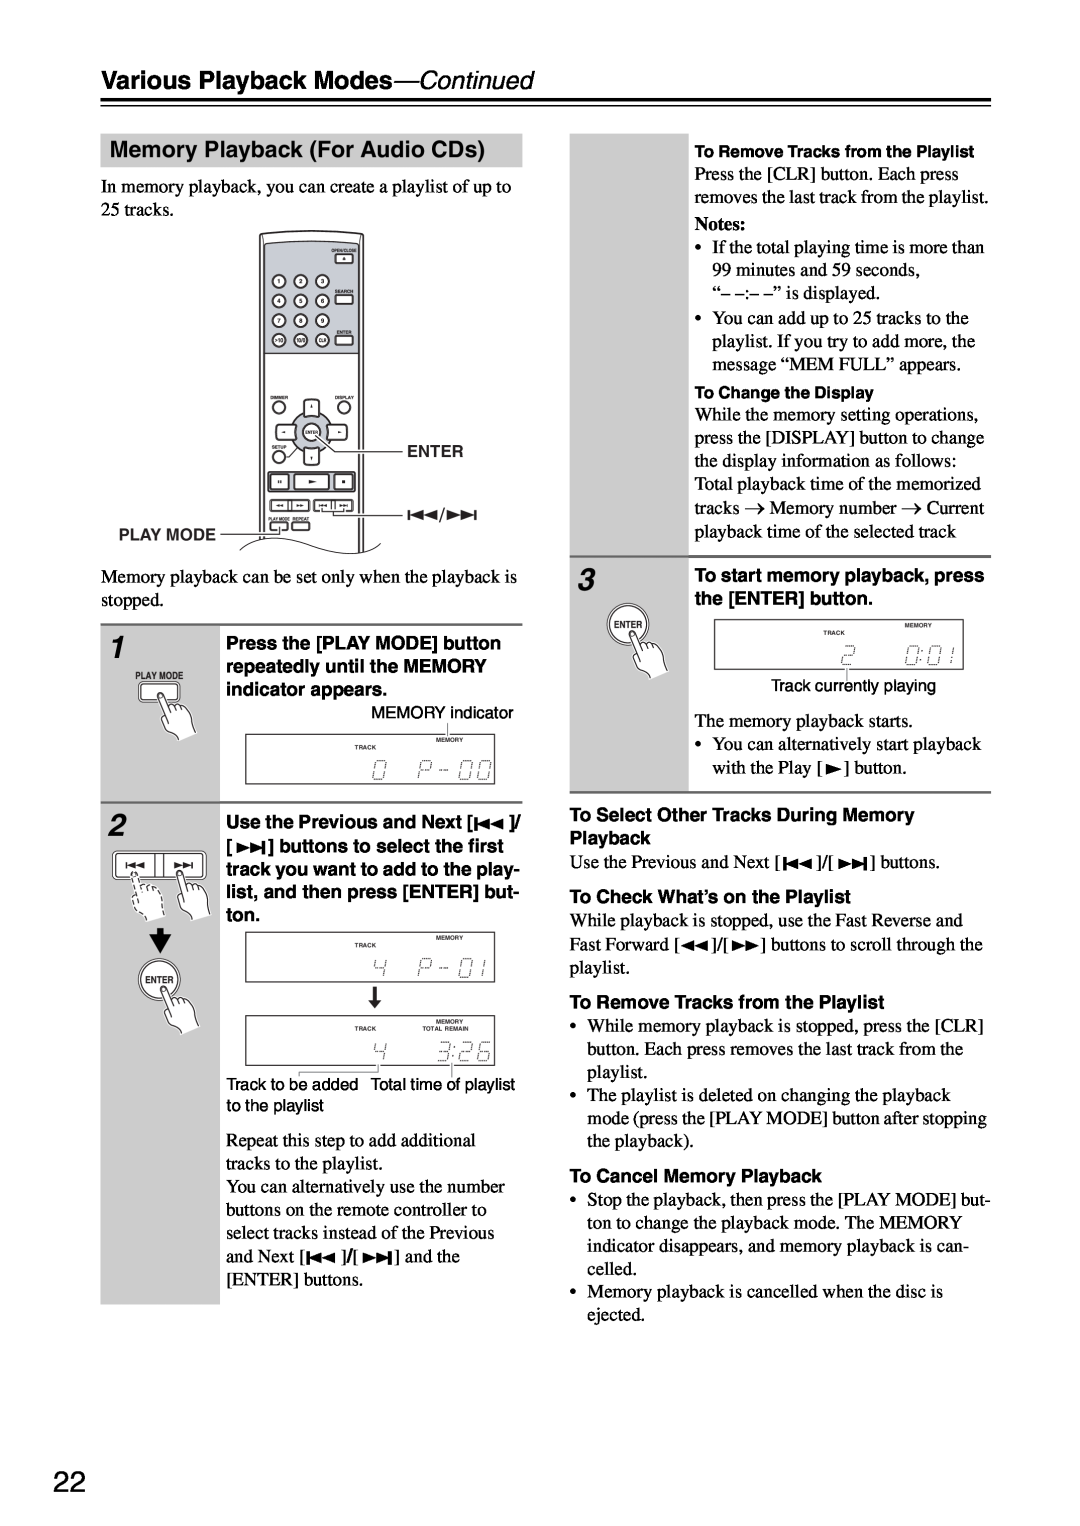 Onkyo DX-7355 instruction manual Various Playback Modes-Continued, Memory Playback For Audio CDs 